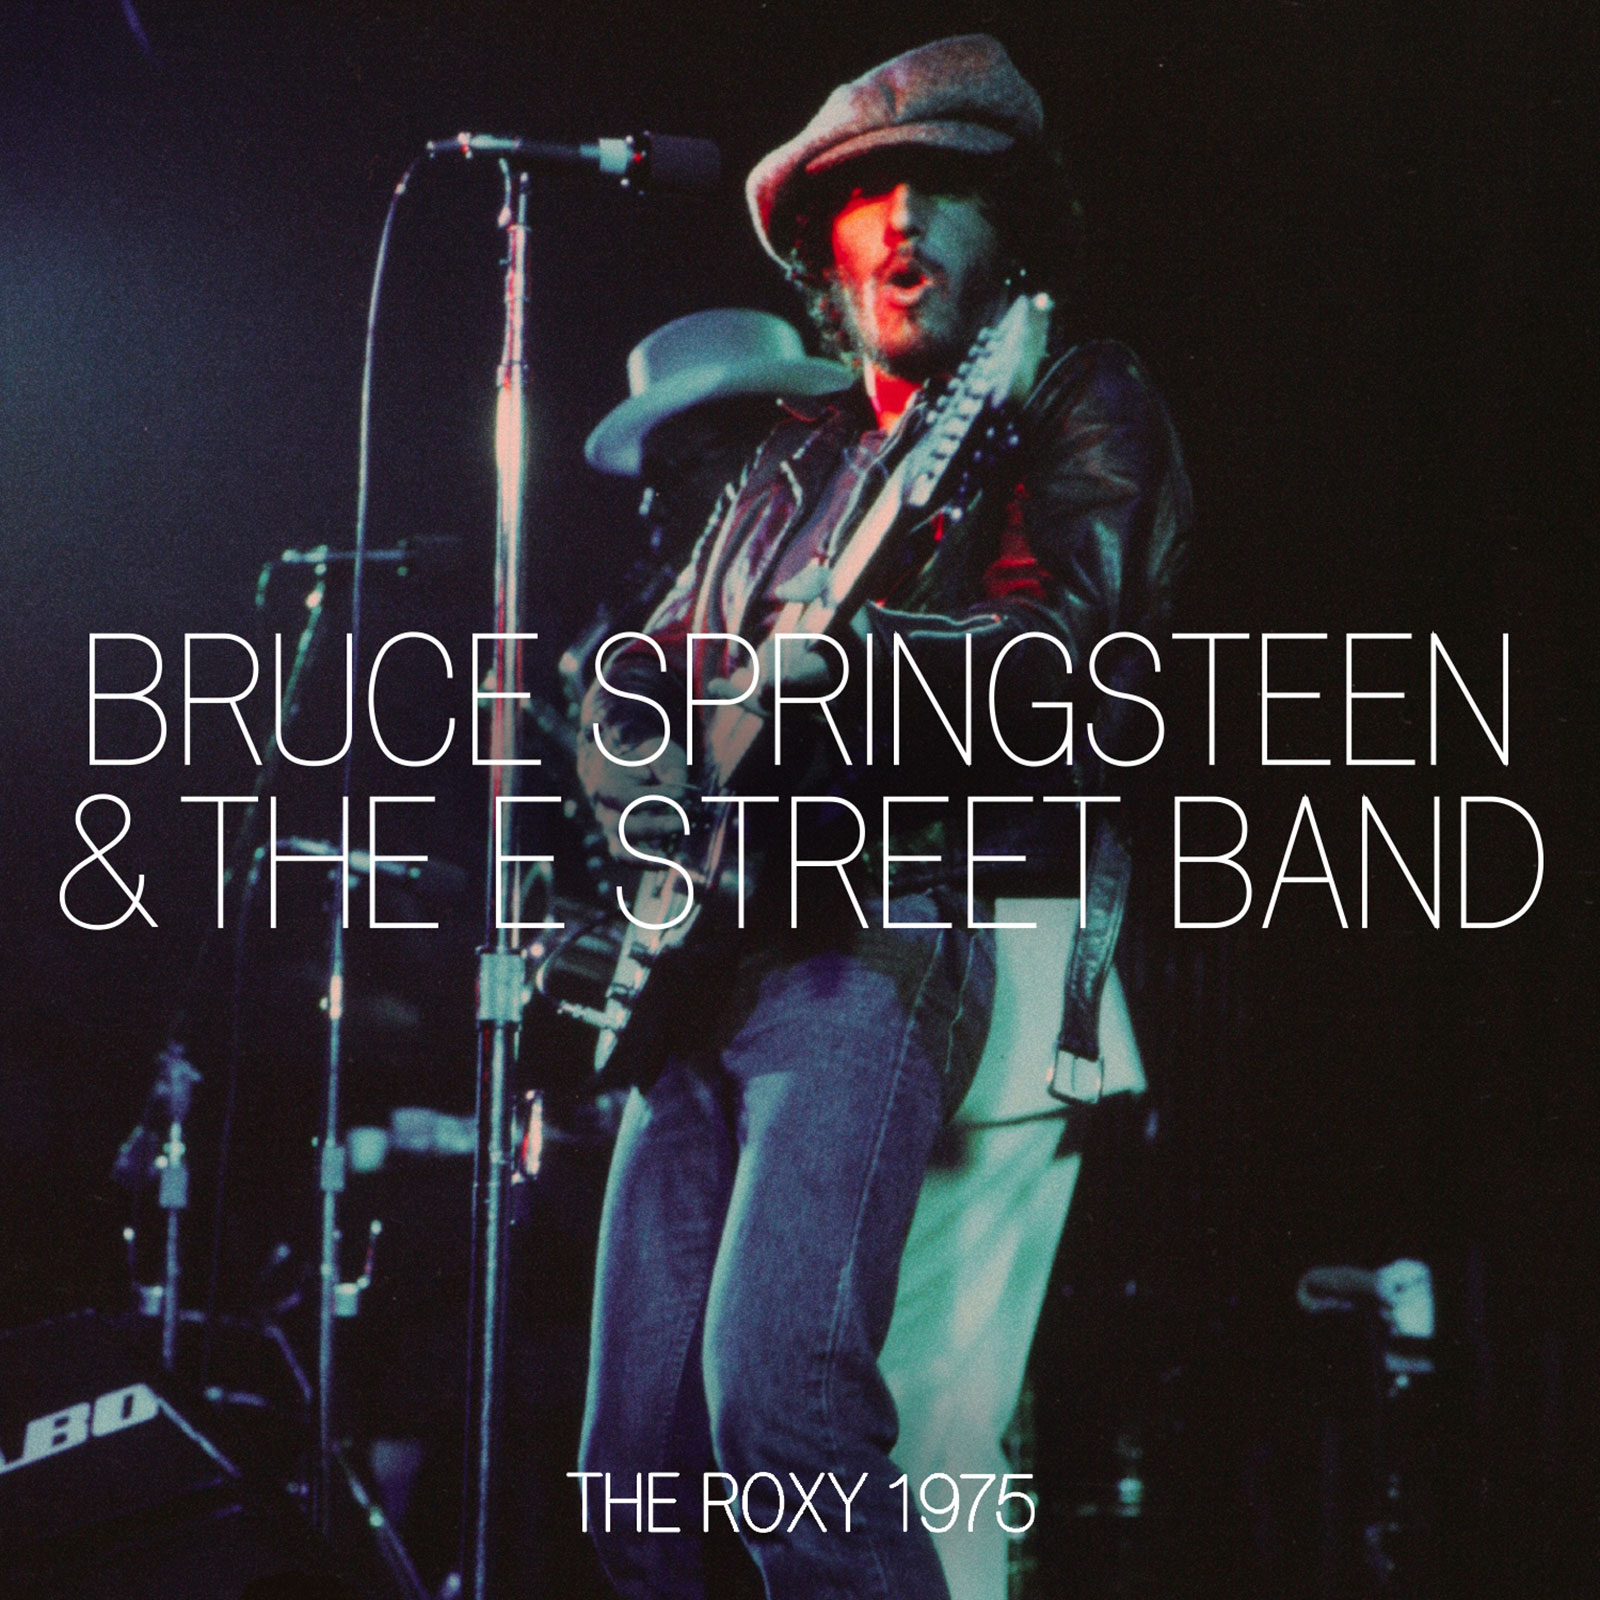 Bruce Springsteen & The E Street Band – 1975-10-18 West Hollywood, CA (2018) [FLAC 24bit/192kHz]